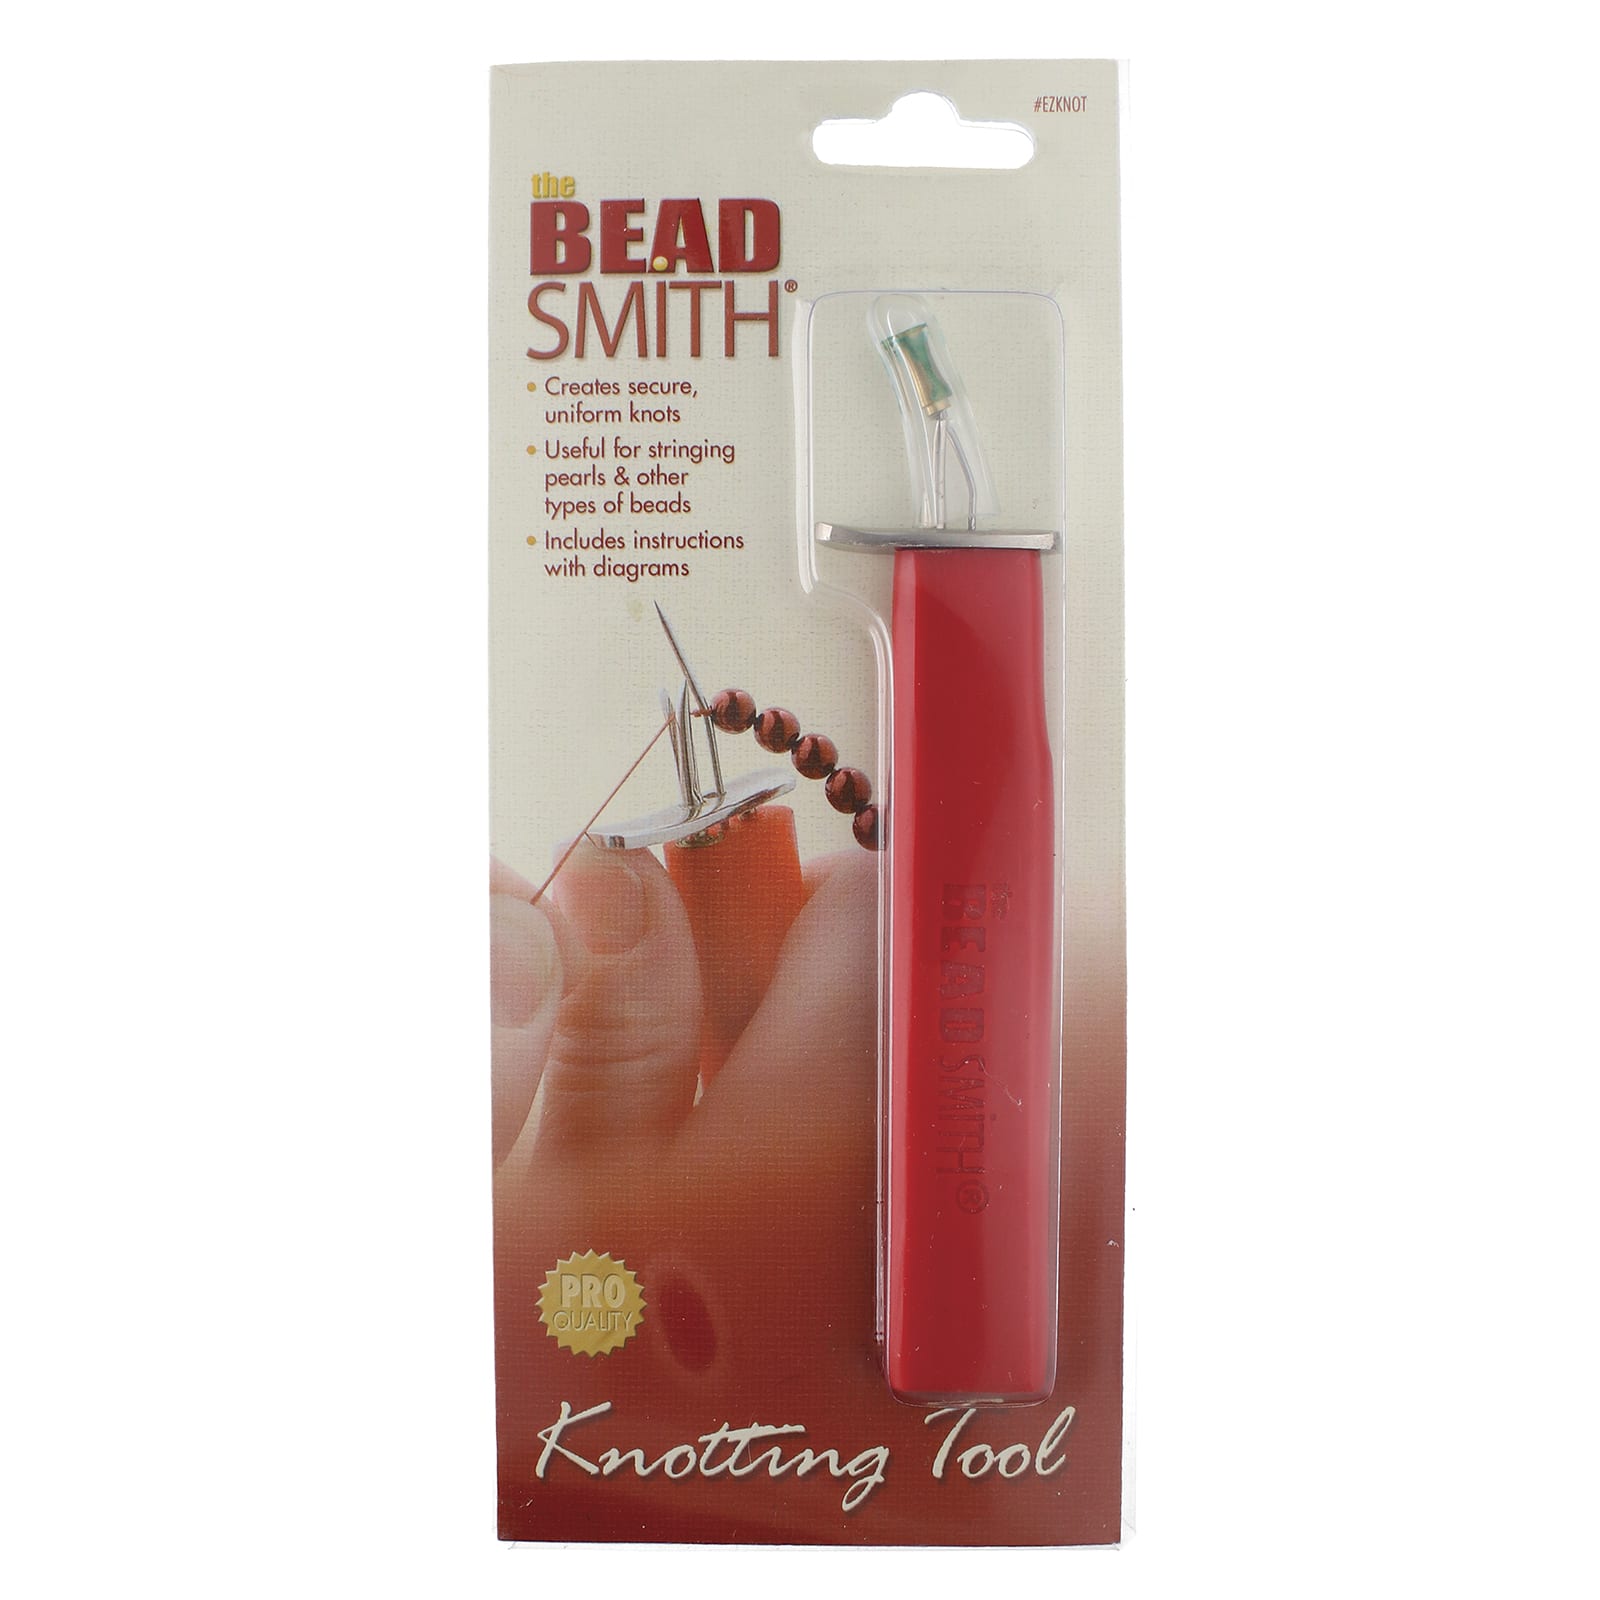 Bead Knotting Tool Beads Agate Knotter Jewelry Making Tool Create